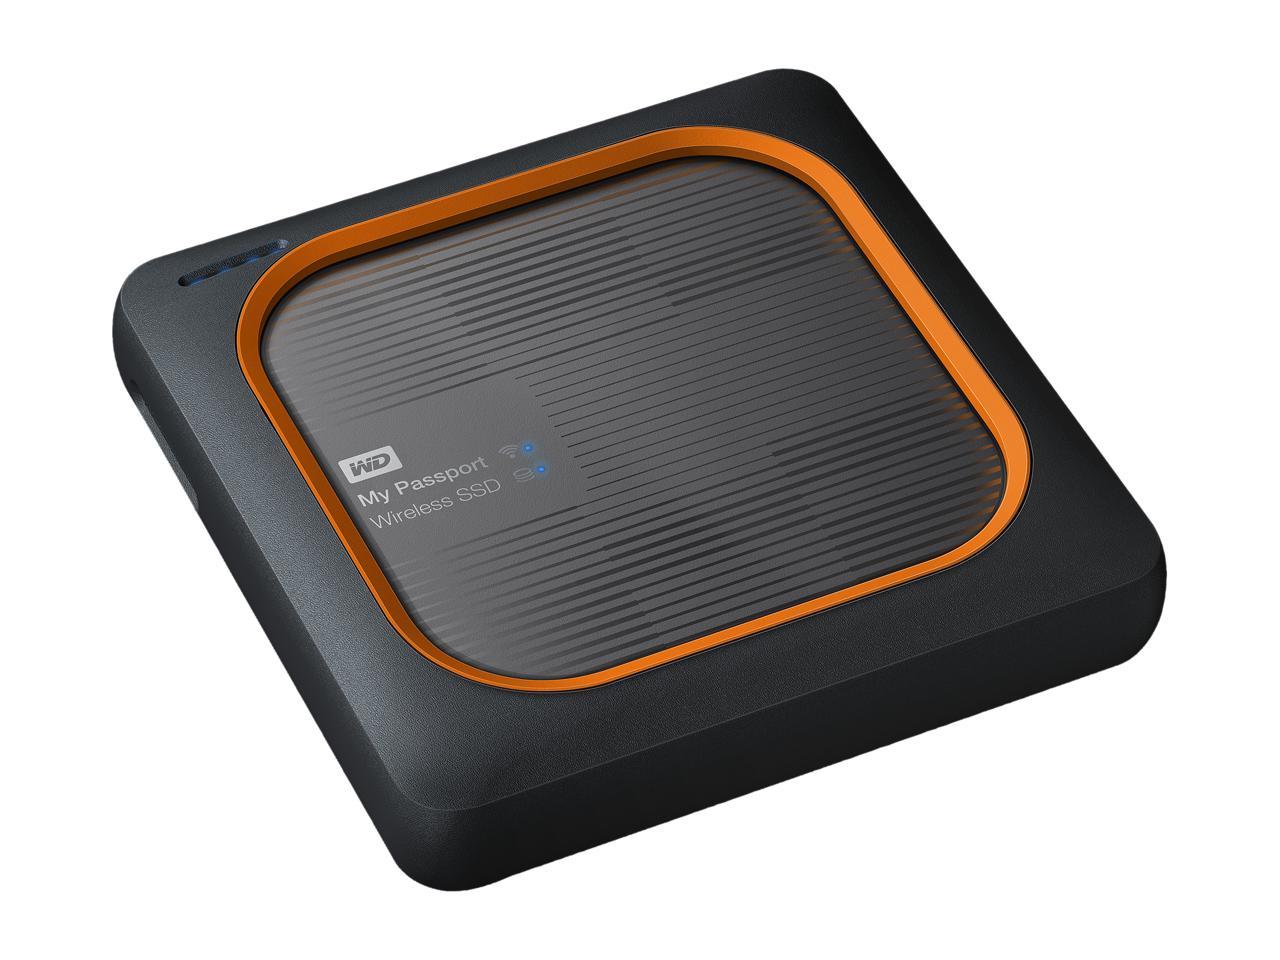 WD 1TB My Passport Wireless SSD External Portable Drive - One-touch SD Card Backup, AC Wi-Fi, USB 3.0, Mobile Access & 4K Streaming